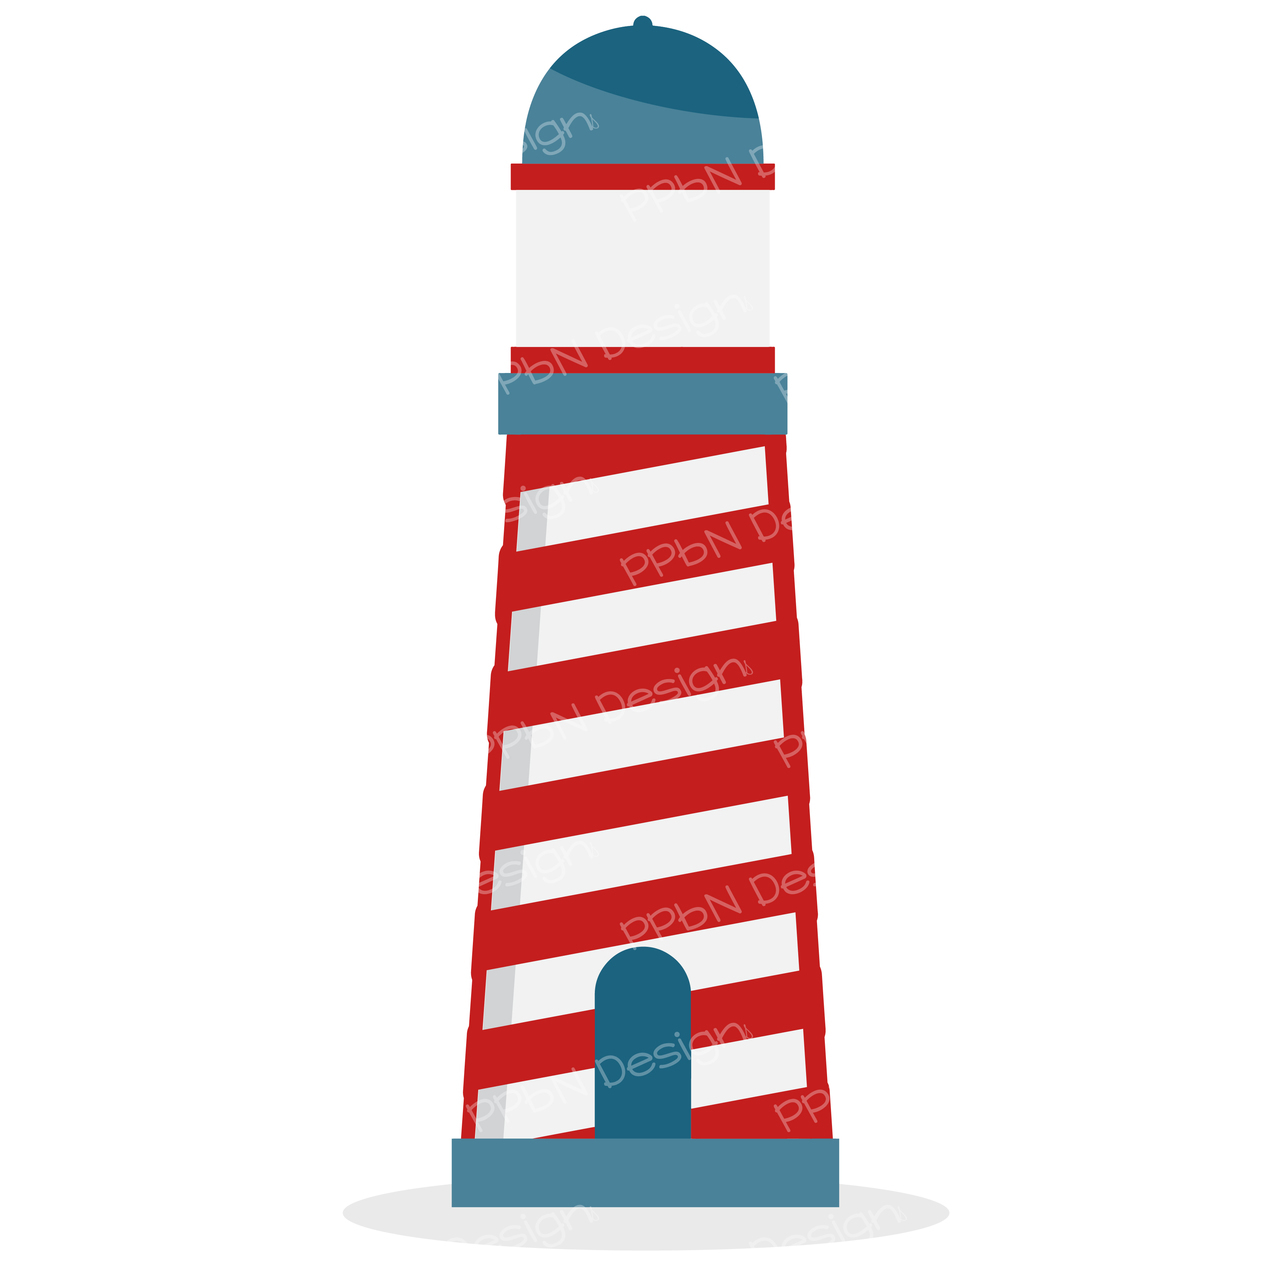 free lighthouse graphics clipart - photo #16